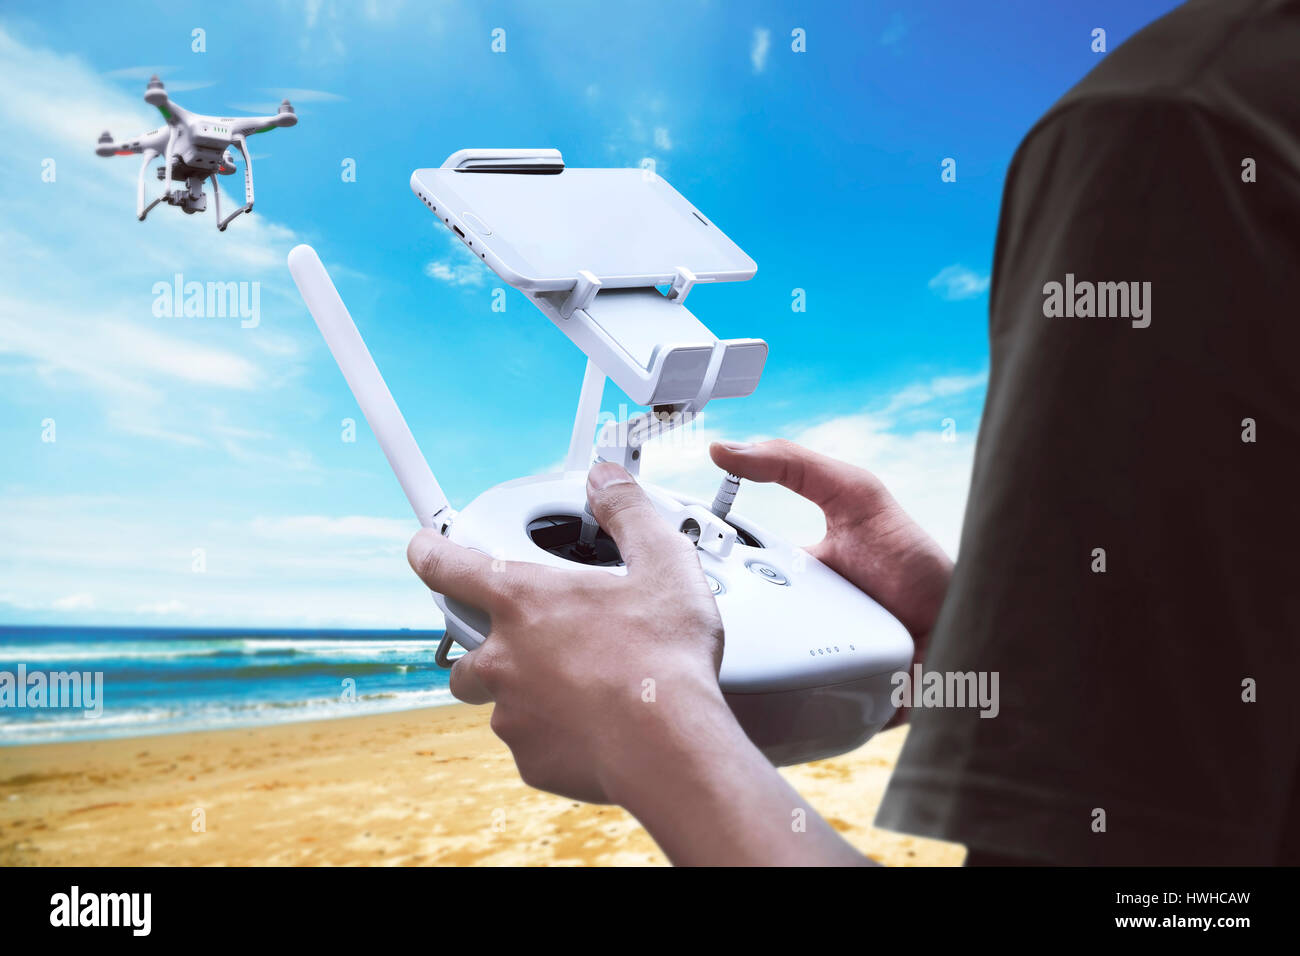 Male pilot controlling drone with remote control Stock Photo